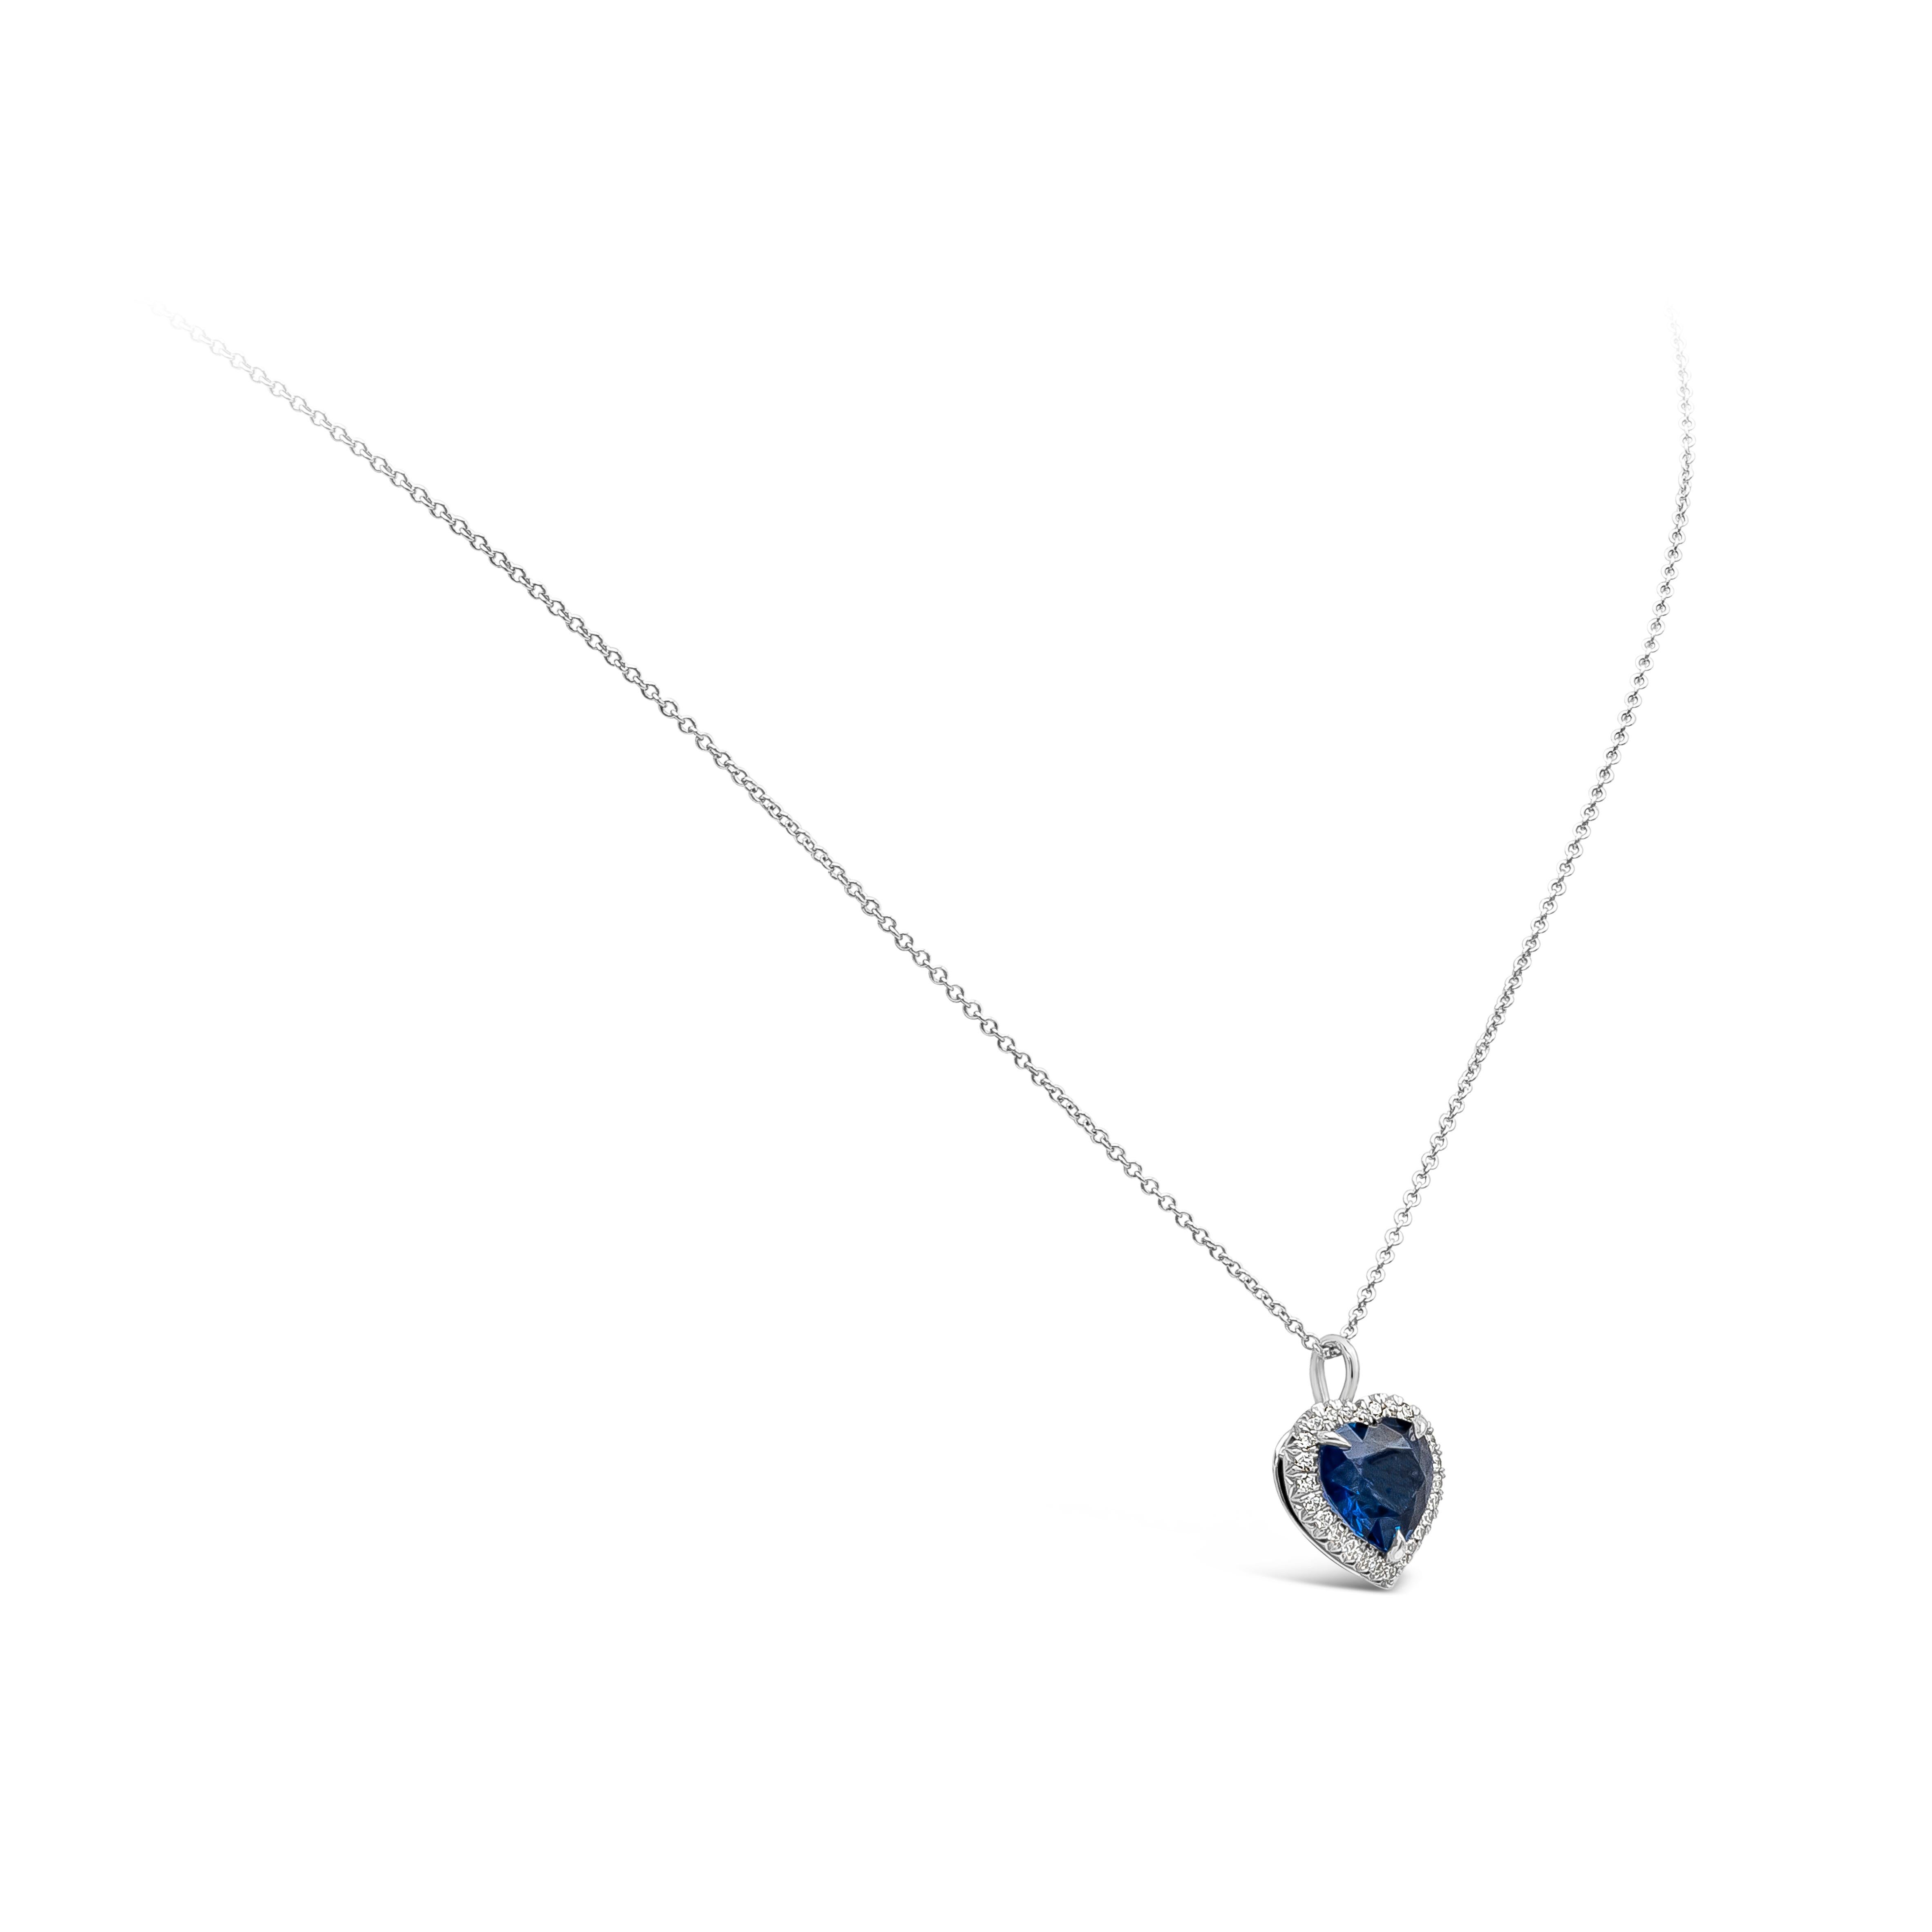 A versatile and unique pendant necklace showcasing a 2.58 carats heart shape blue sapphire certified by GIA as Sri Lanka origin. Surrounded by a row of round brilliant diamonds weighing 0.20 carats total, F color and VS in clarity. Finely made in